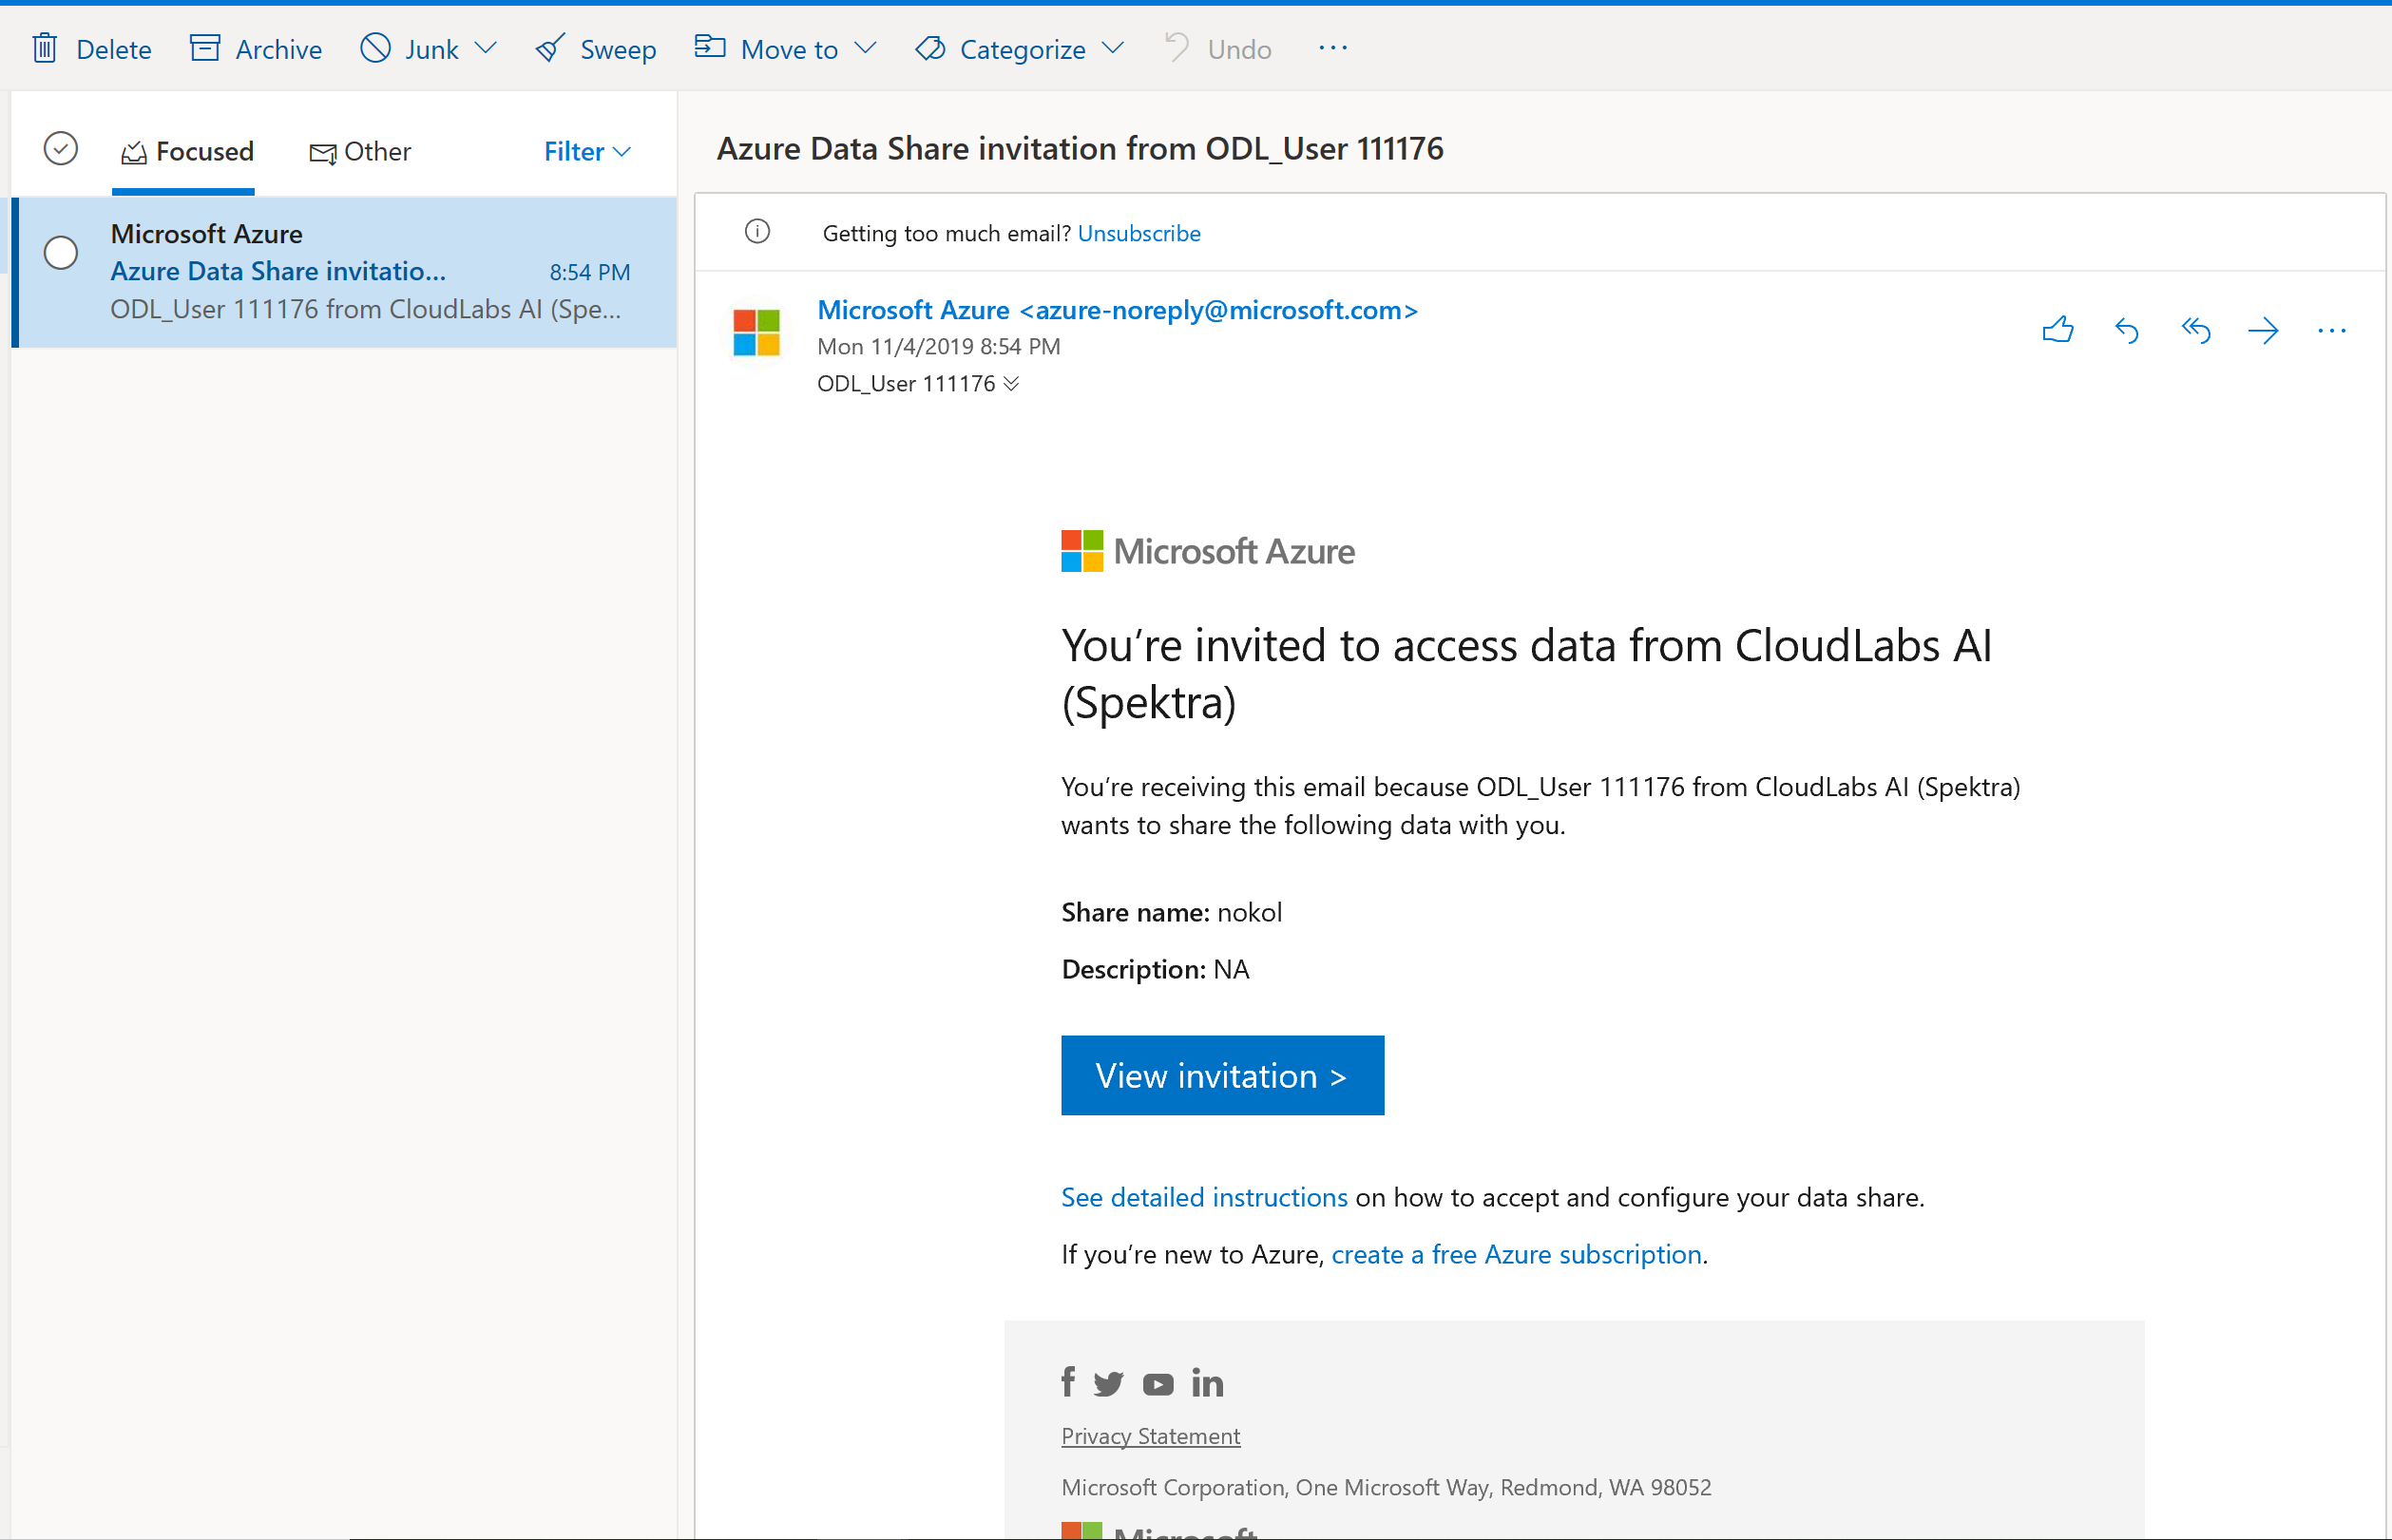 Screenshot from Outlook of an Email invitation.